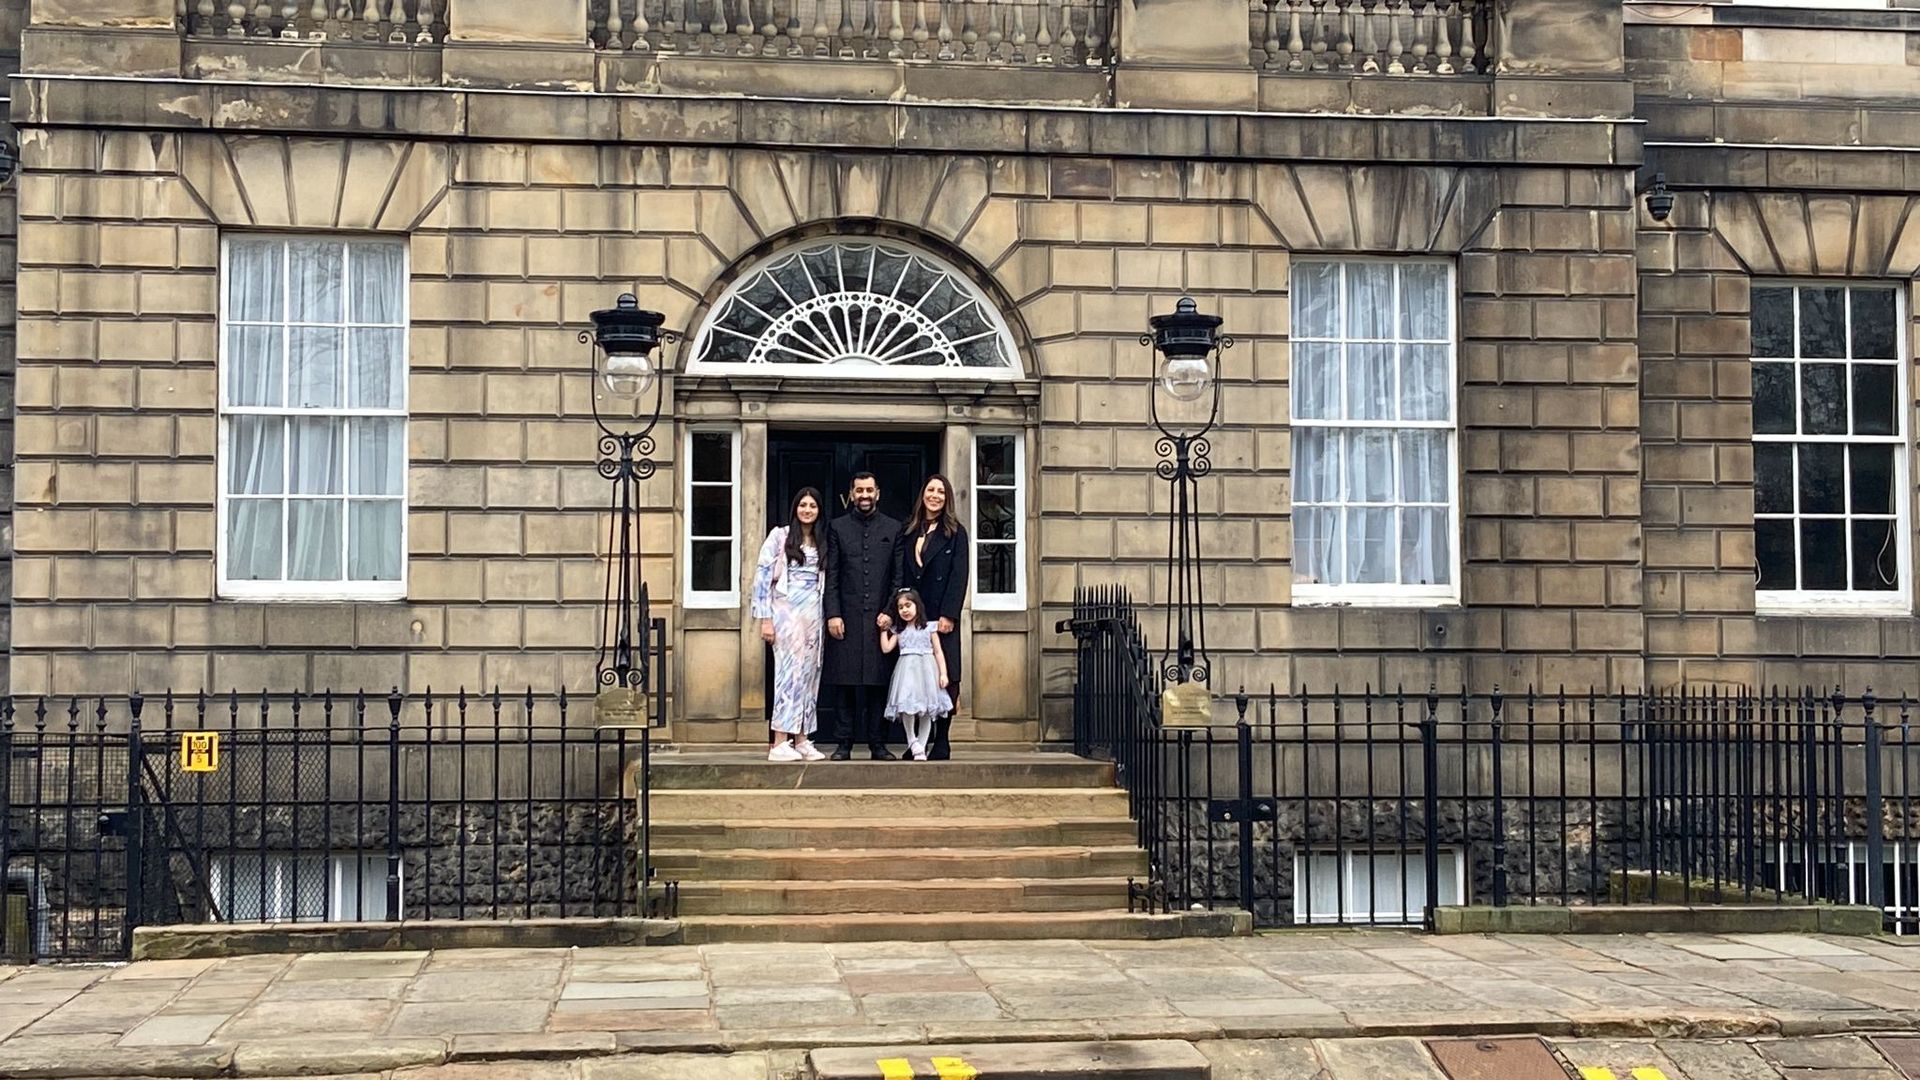 Humza Yousaf arrived at Bute House with his family shortly after being legally confirmed as Scotland's First Minister.